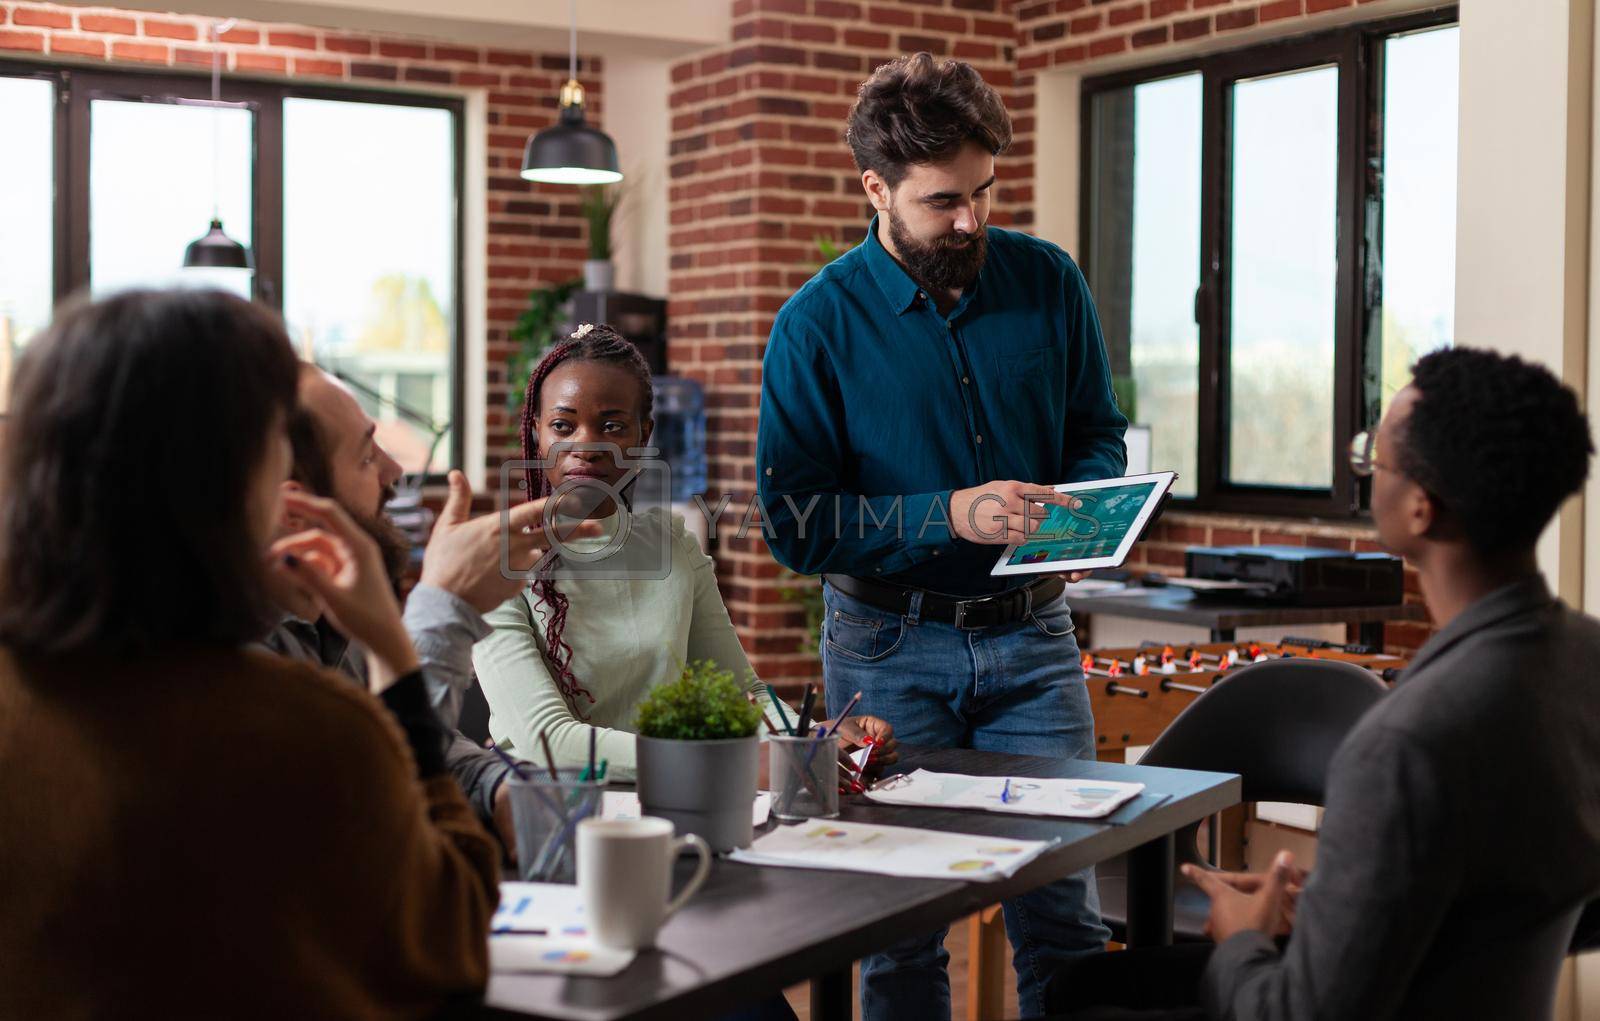 Businessman presenting company turnover during business meeting in startup office working at marketing strategy. Multiethnic businesspeople brainstorming ideas for management project